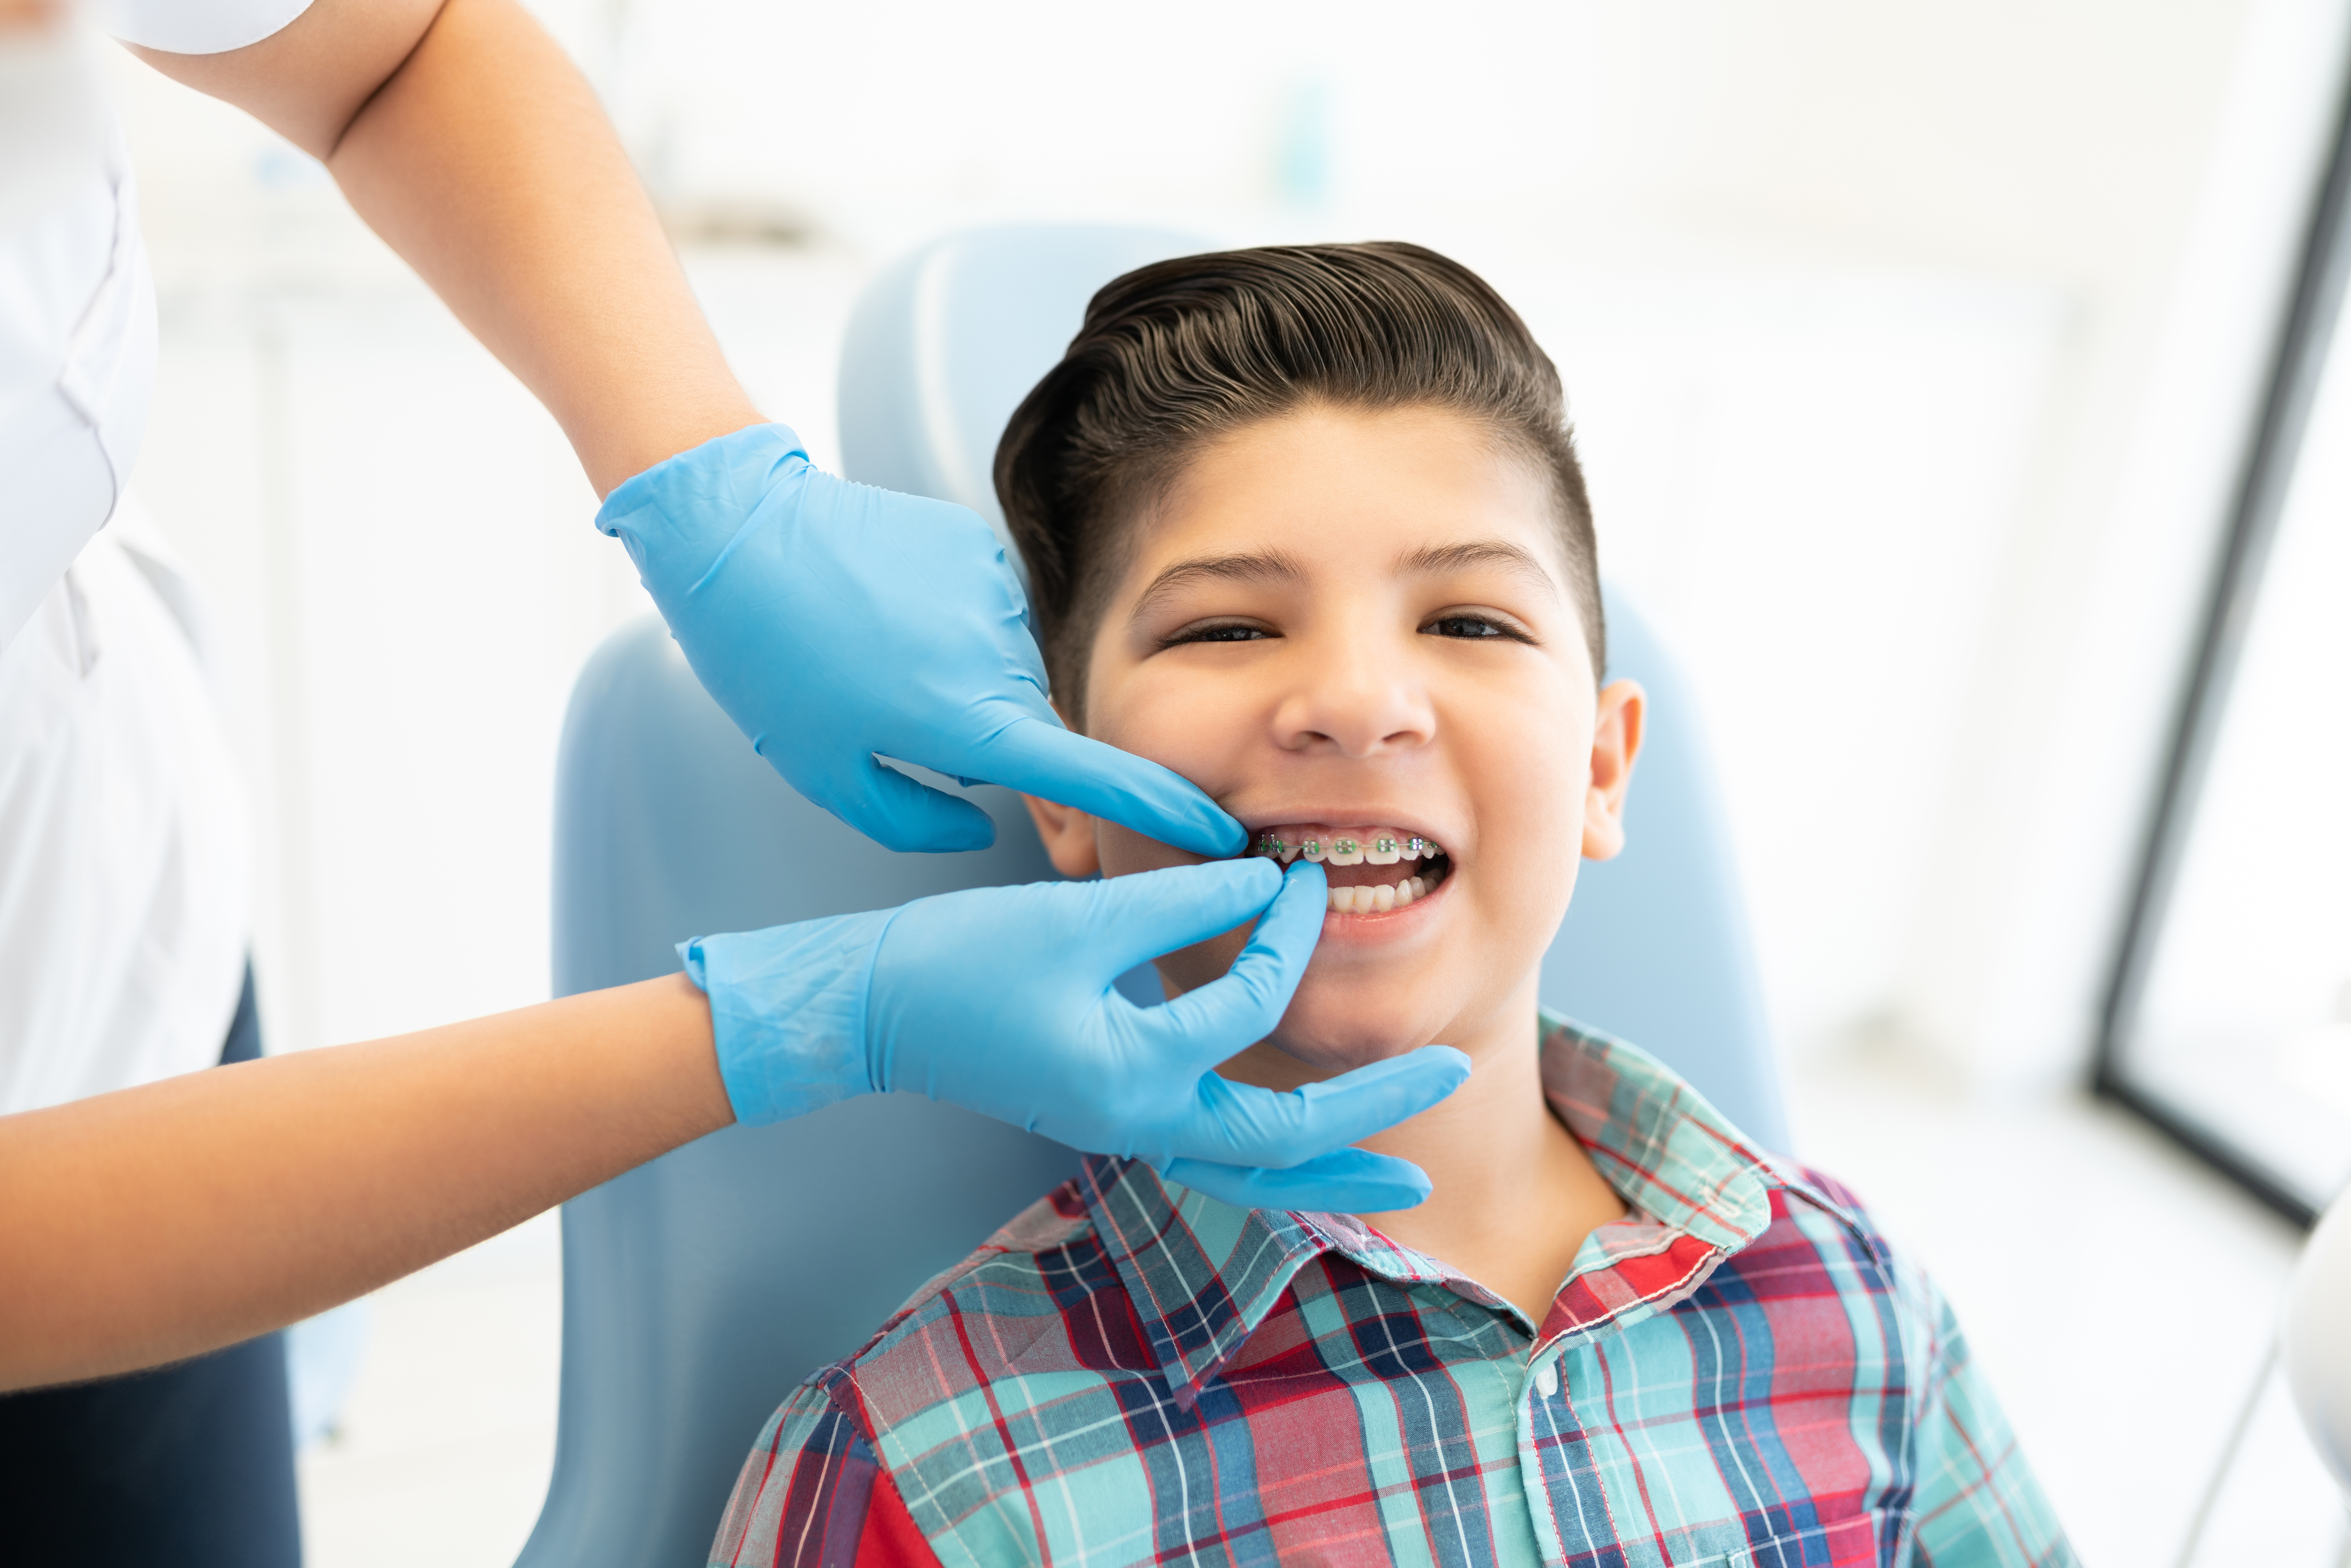 Why Do My Teeth Feel Loose During Orthodontic Treatment?